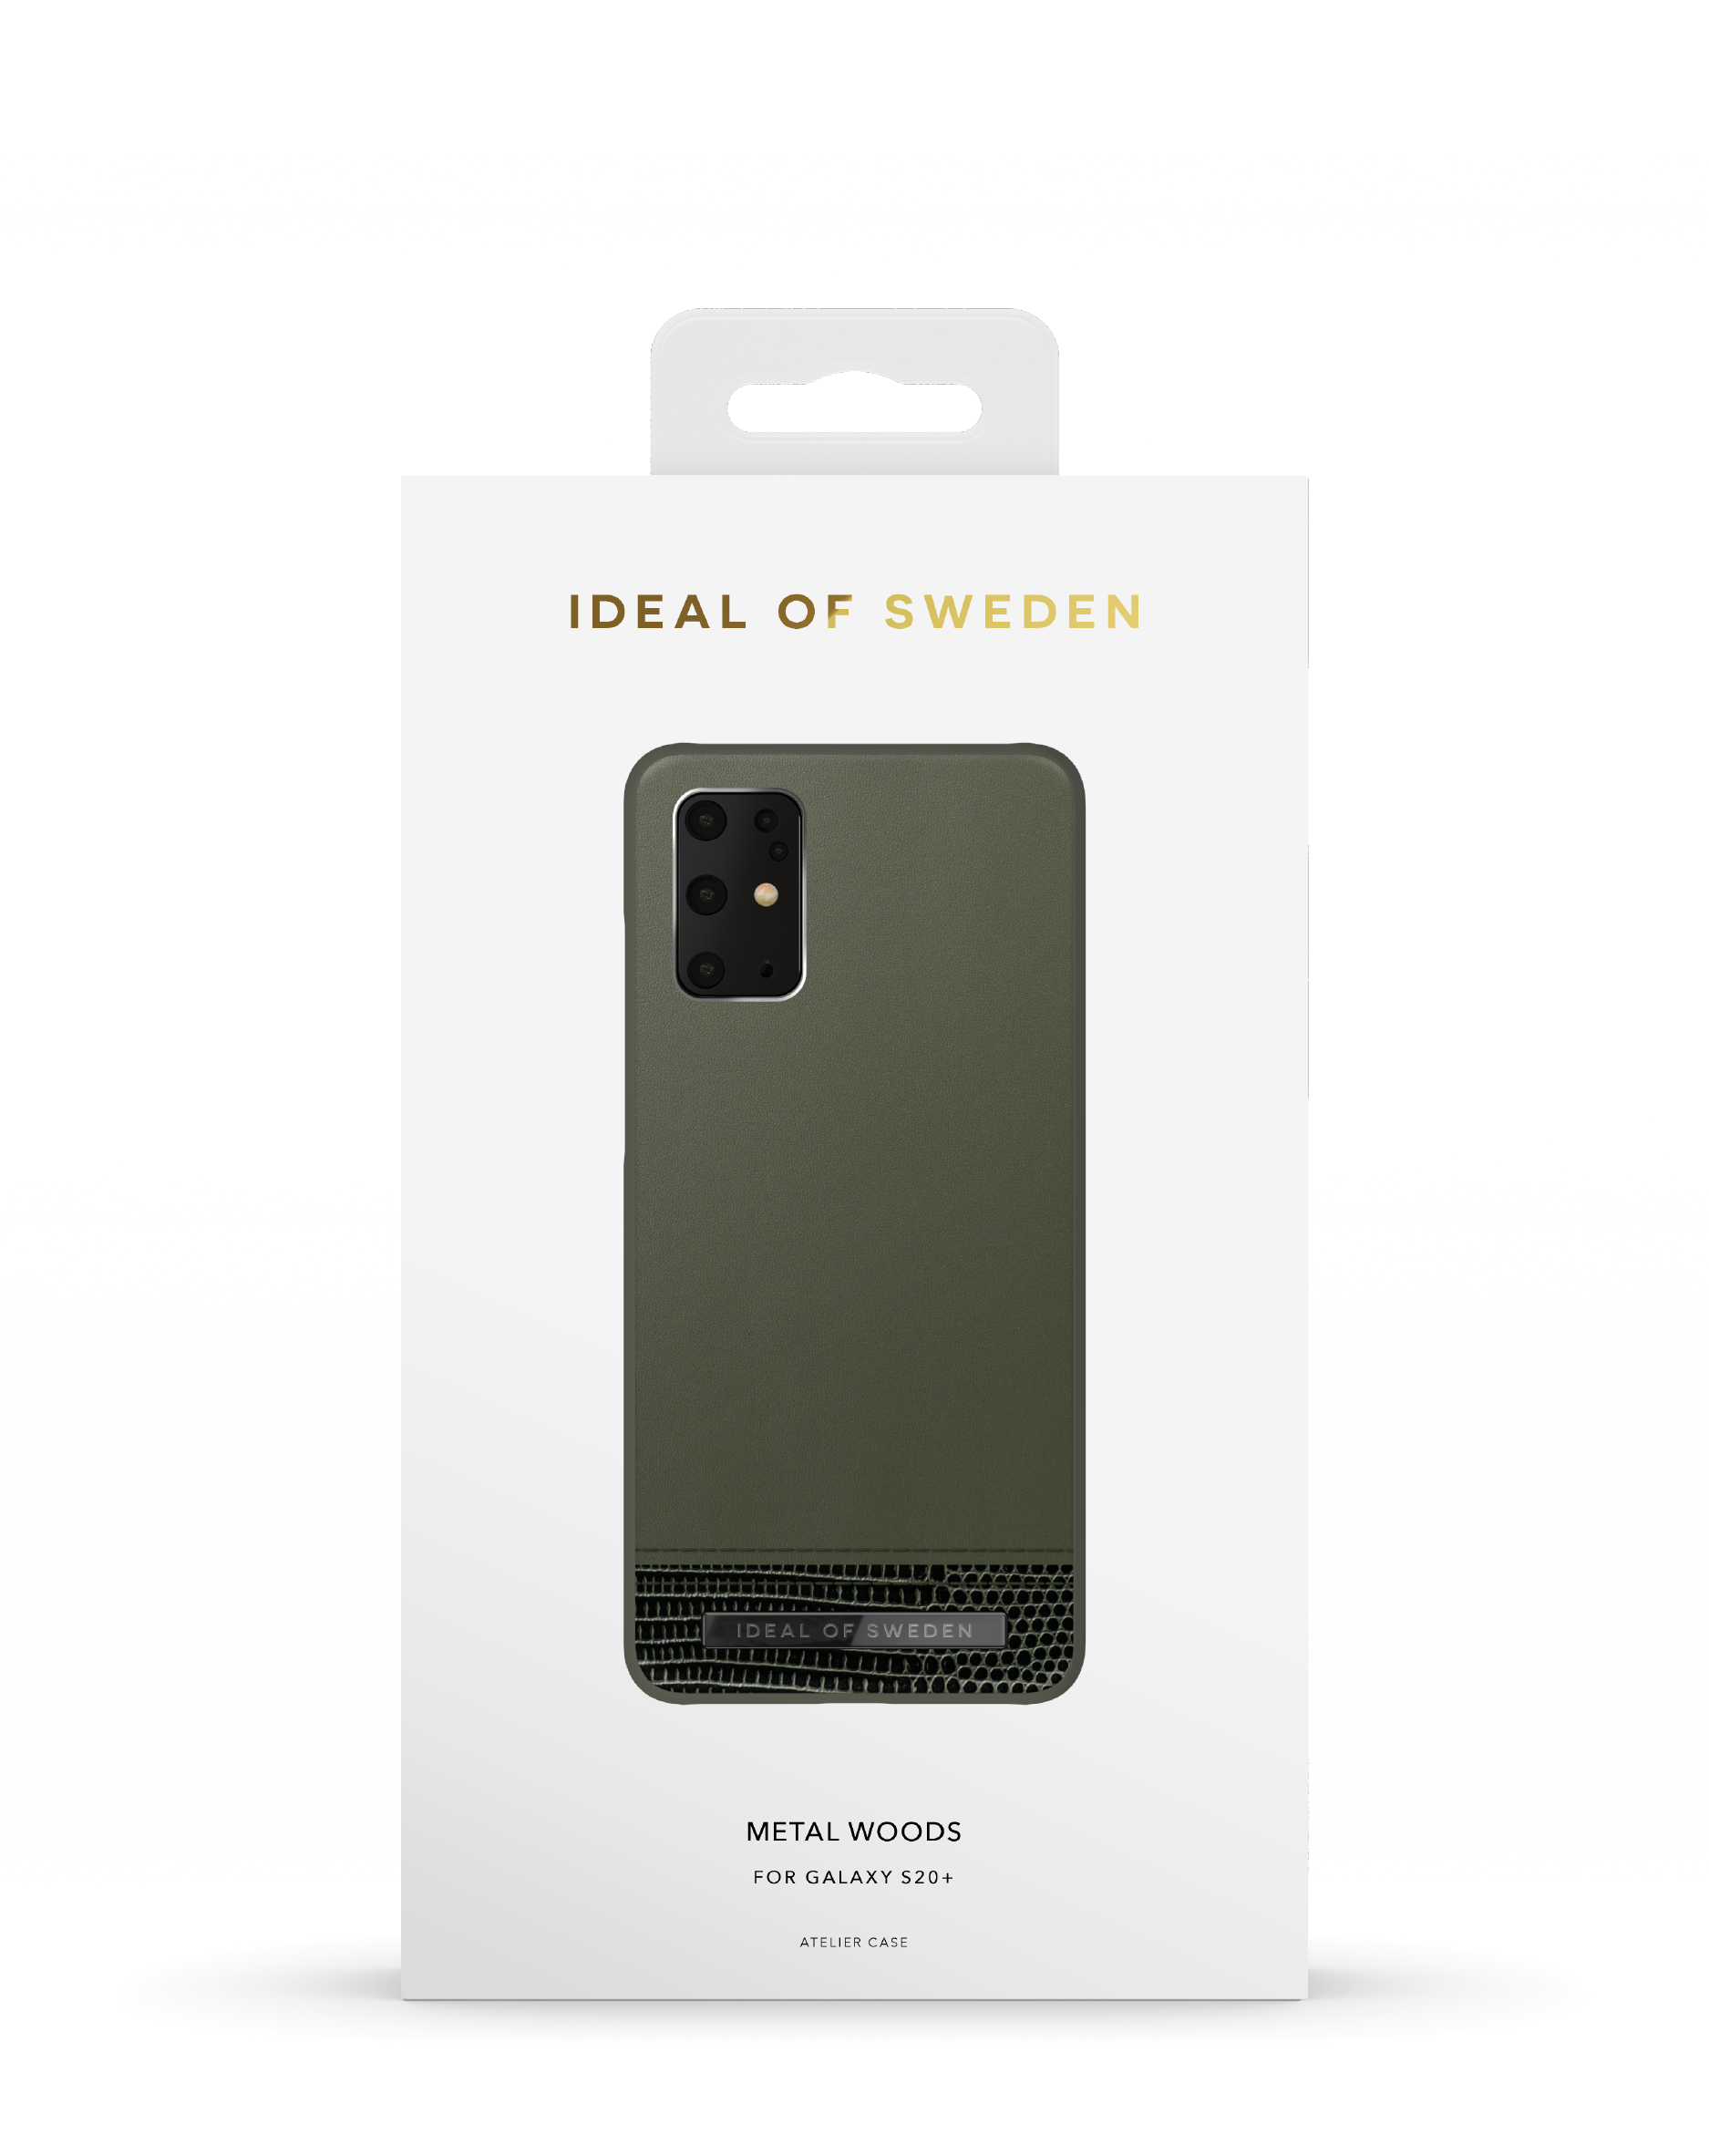 IDEAL Ultra, S20 Backcover, IDACAW20-S11P-235, SWEDEN Metal Samsung, OF Galaxy Woods